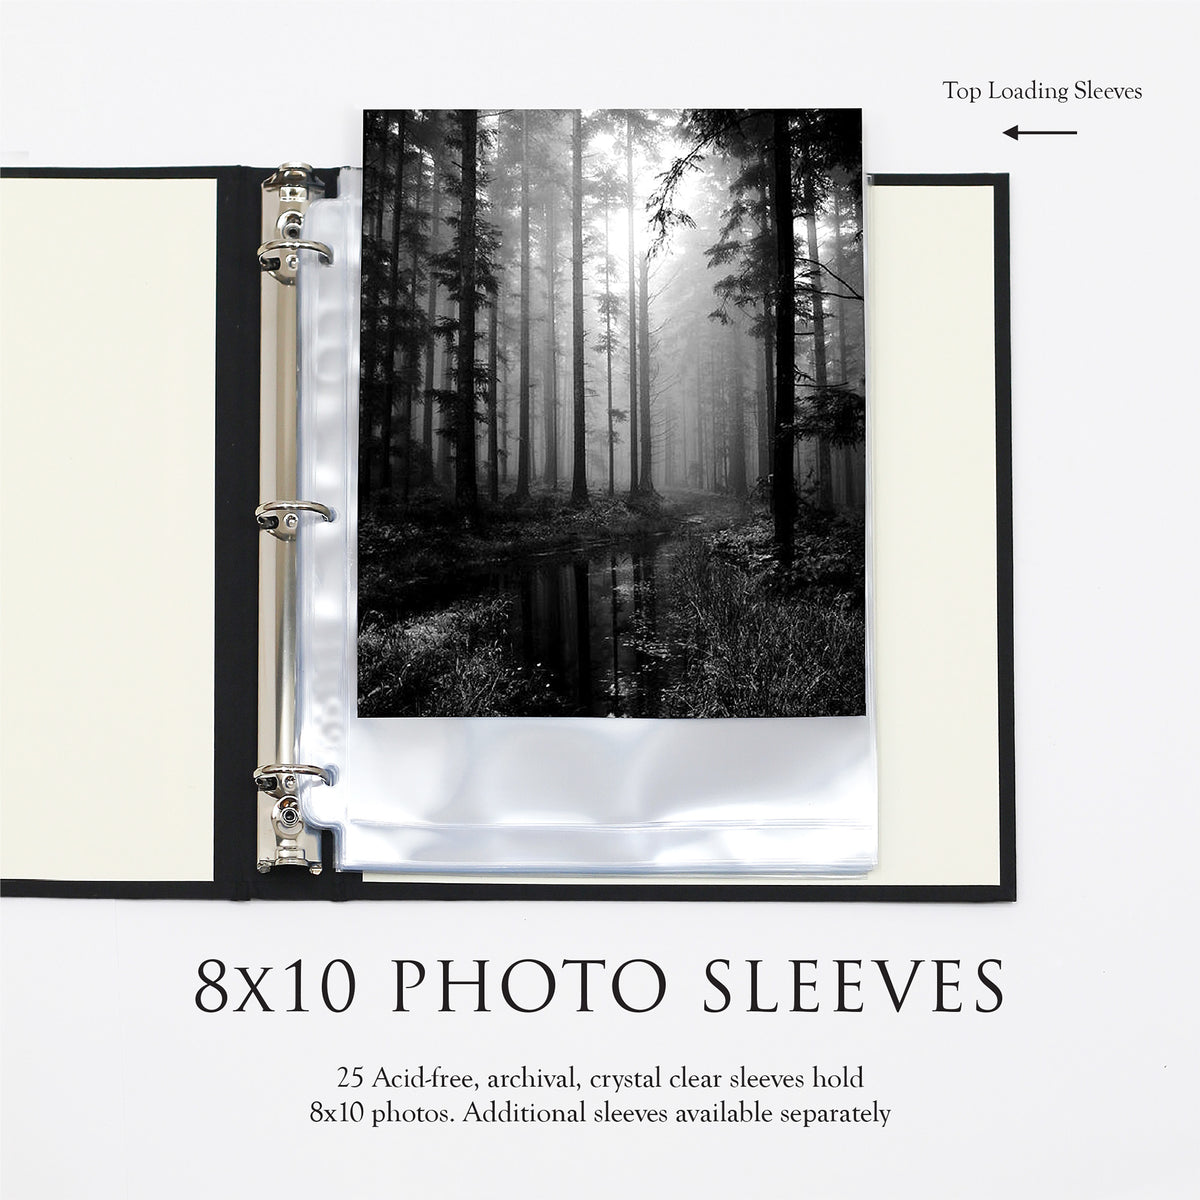 Large Photo Binder For 8x10 Photos | Cover: Mocha Vegan Leather | Available Personalized